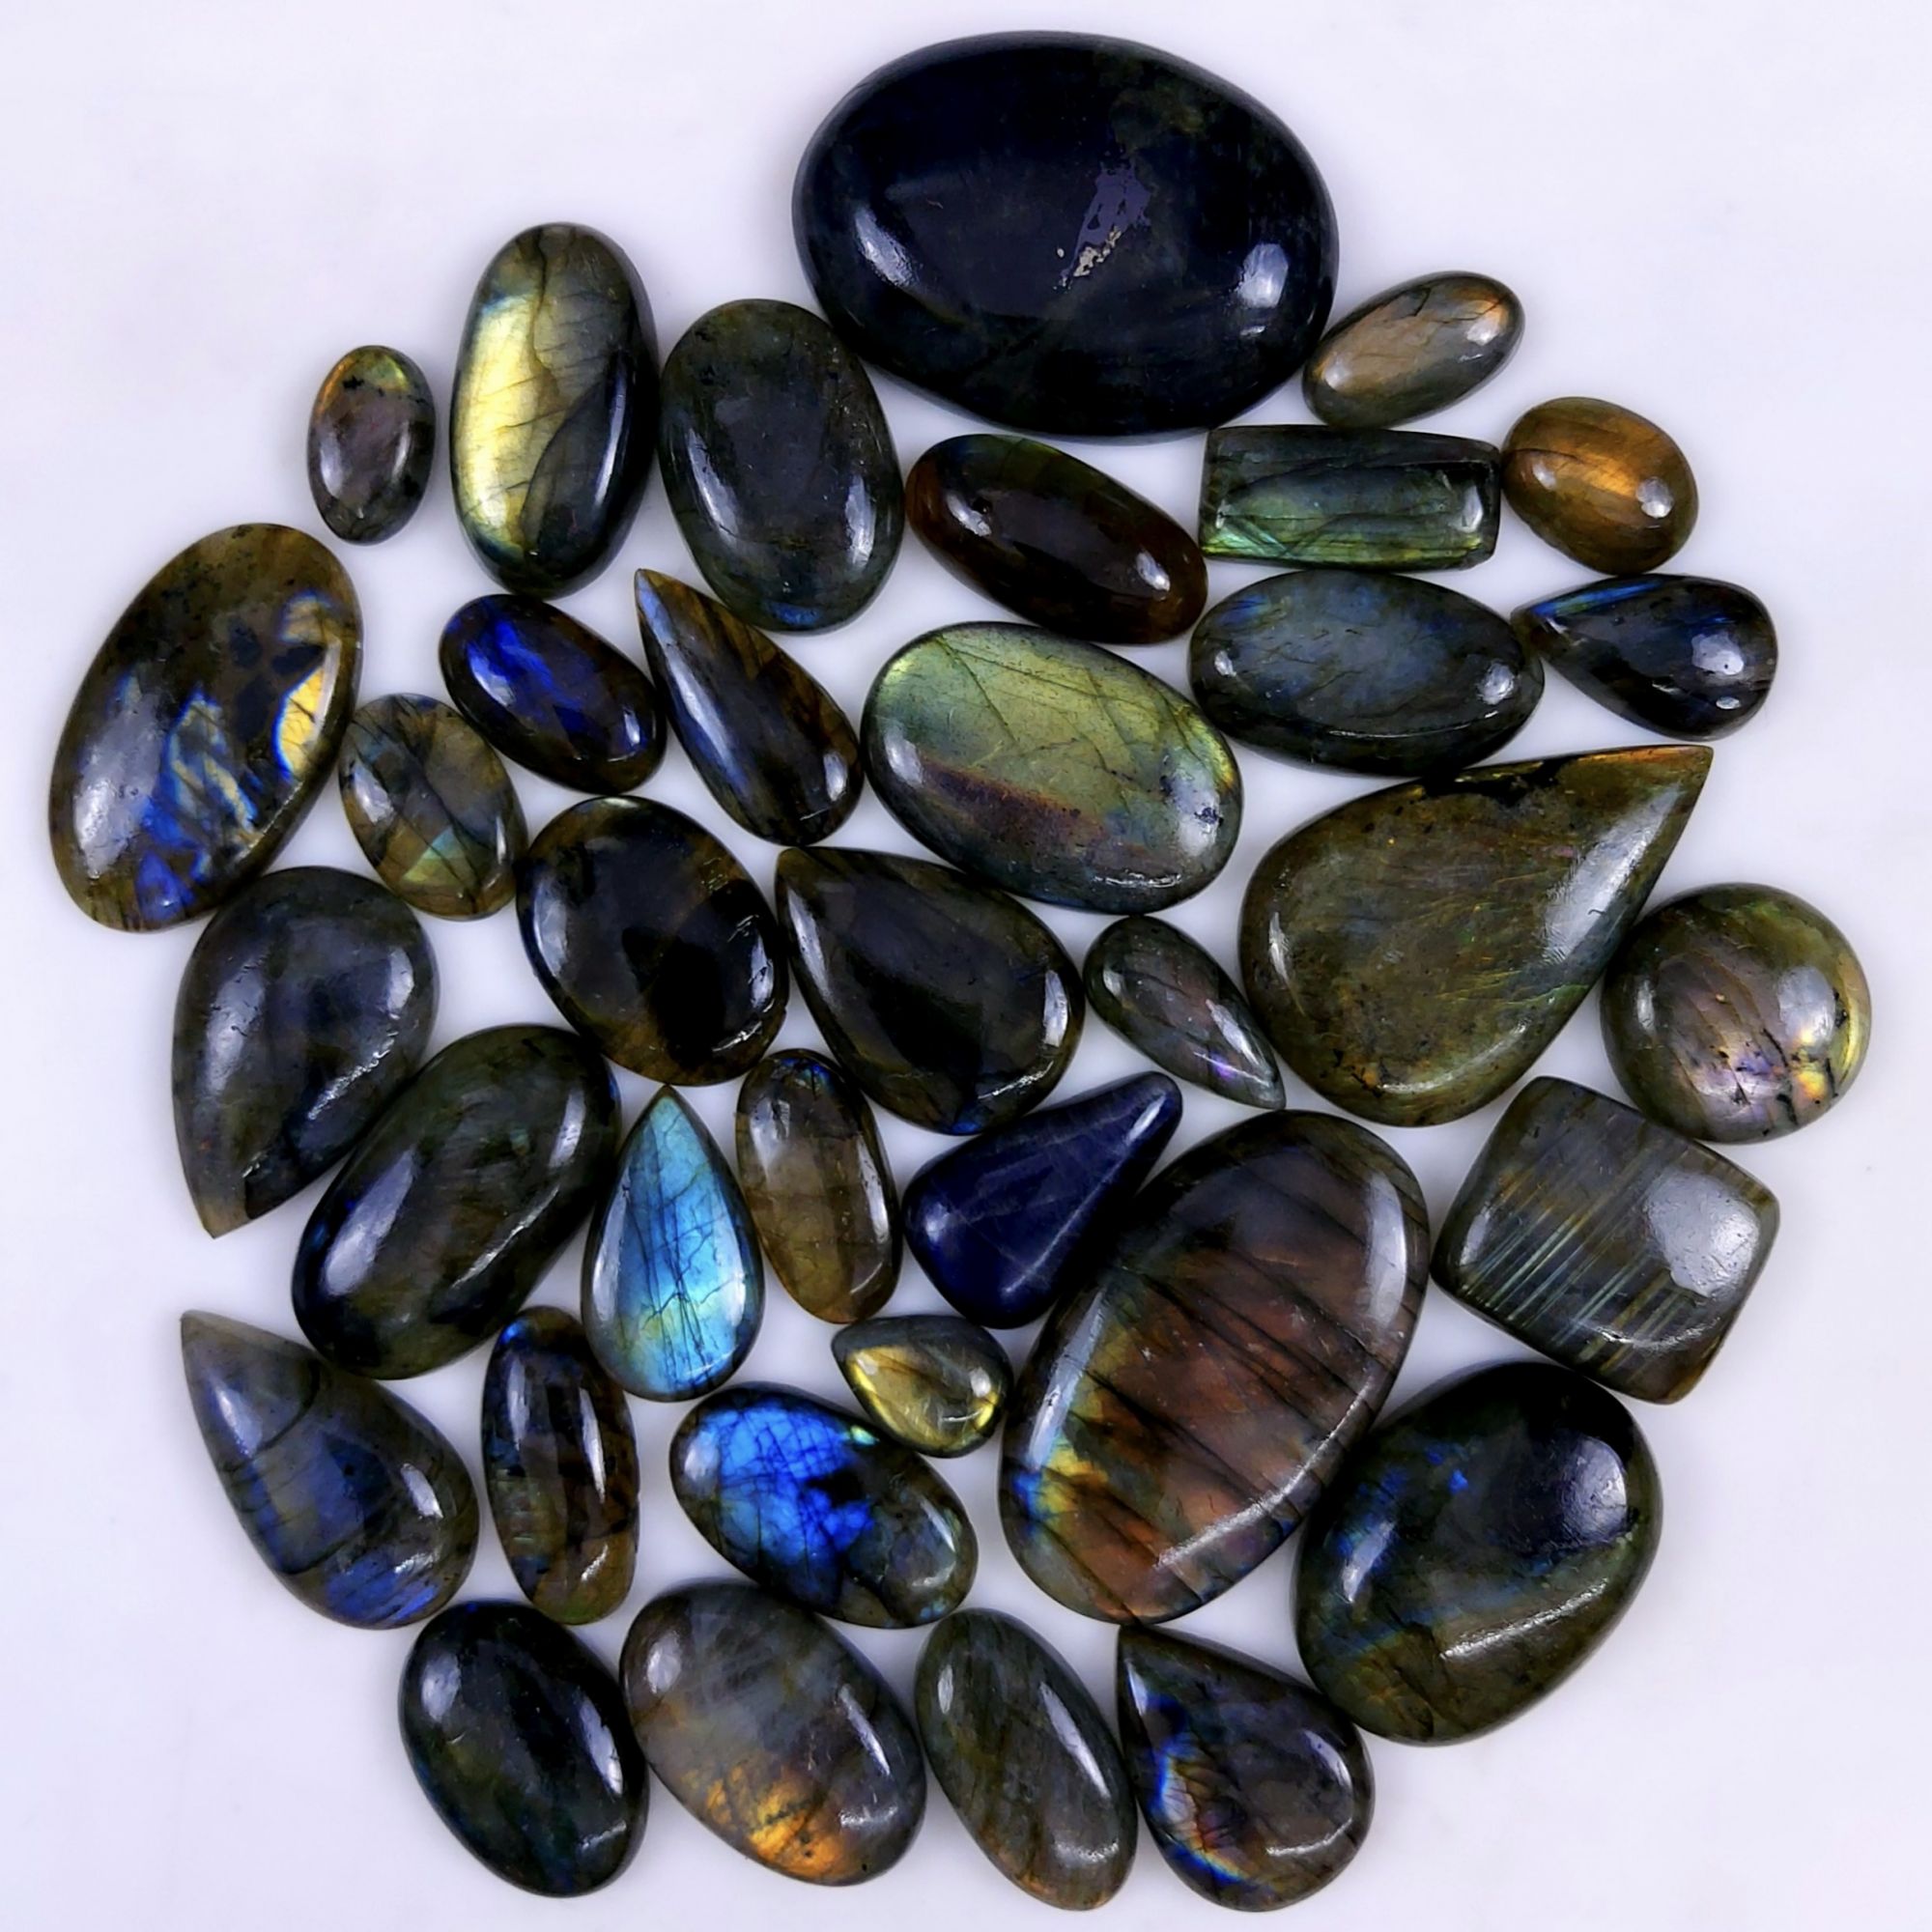 36pc 1595Cts Labradorite Cabochon Multifire Healing Crystal For Jewelry Supplies, Labradorite Necklace Handmade Wire Wrapped Gemstone Pendant 52x32 16x12mm#6312